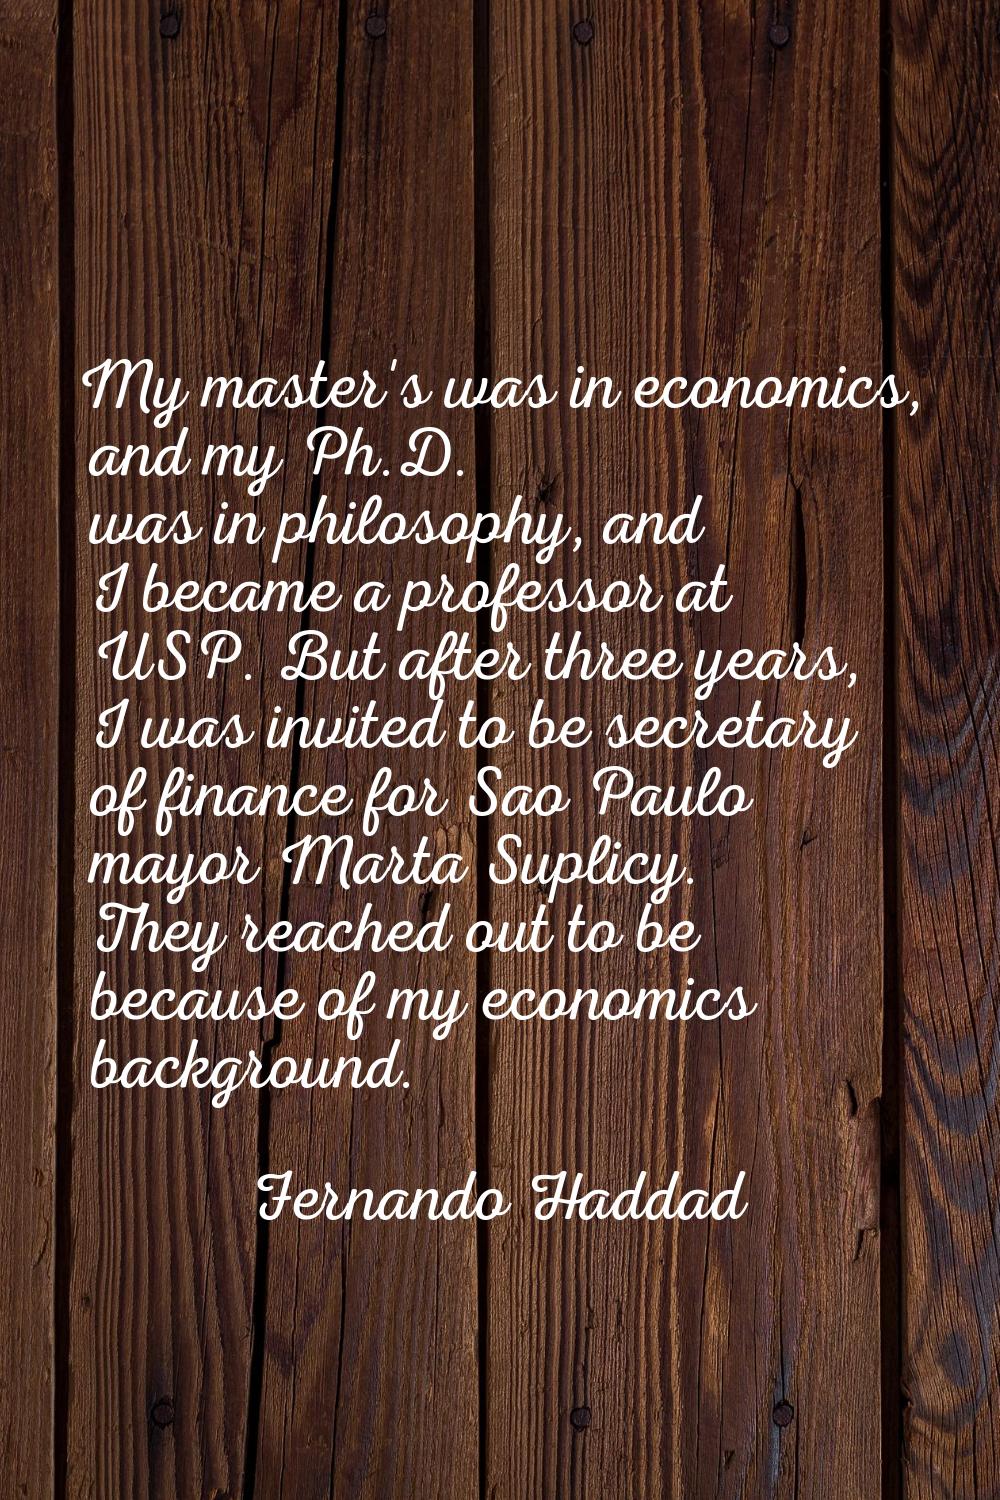 My master's was in economics, and my Ph.D. was in philosophy, and I became a professor at USP. But 